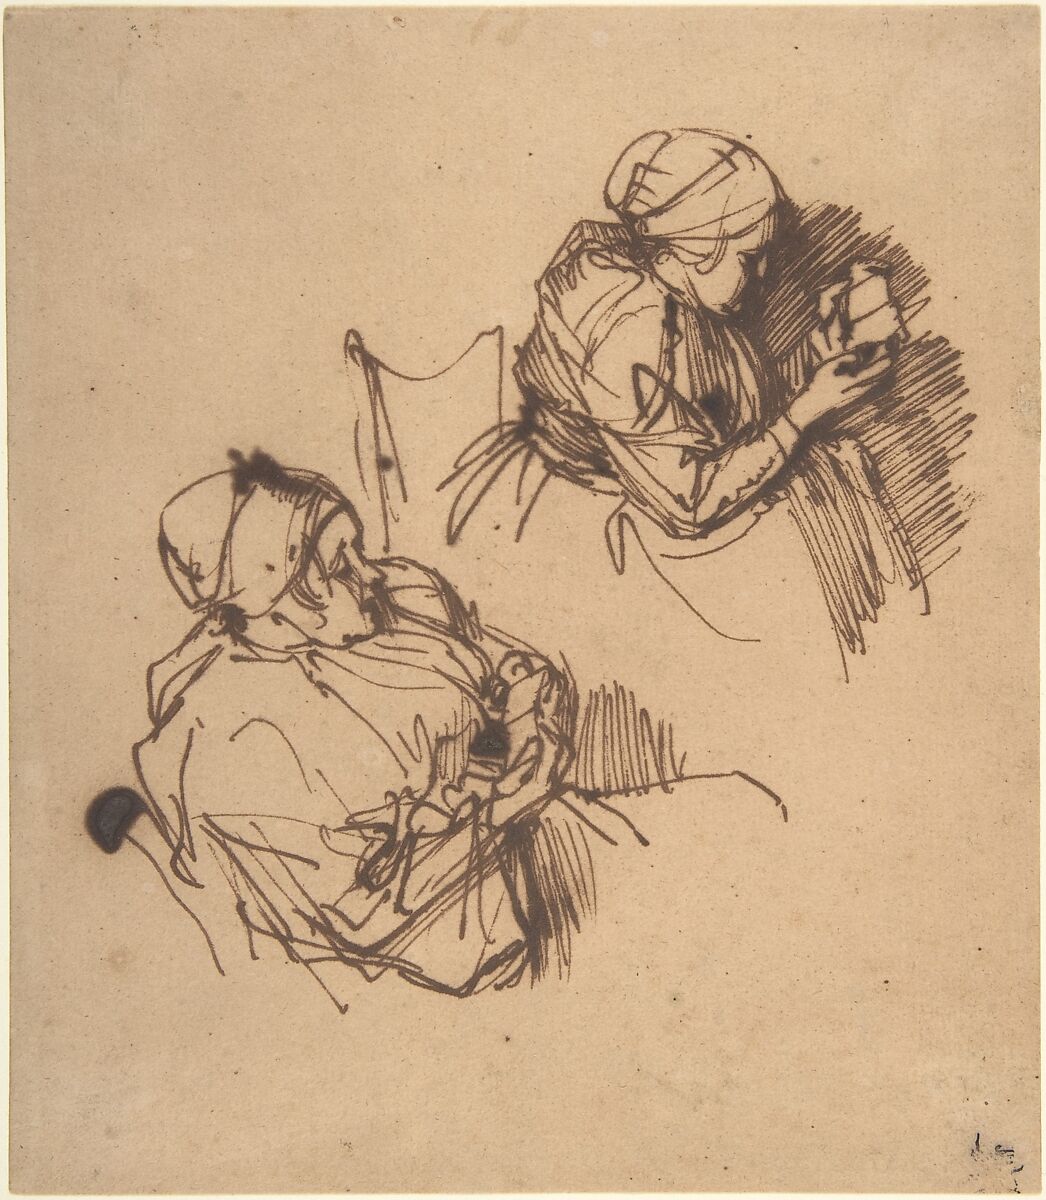 Two Studies of a Woman Reading, Rembrandt (Rembrandt van Rijn)  Dutch, Pen and brown iron-gall ink